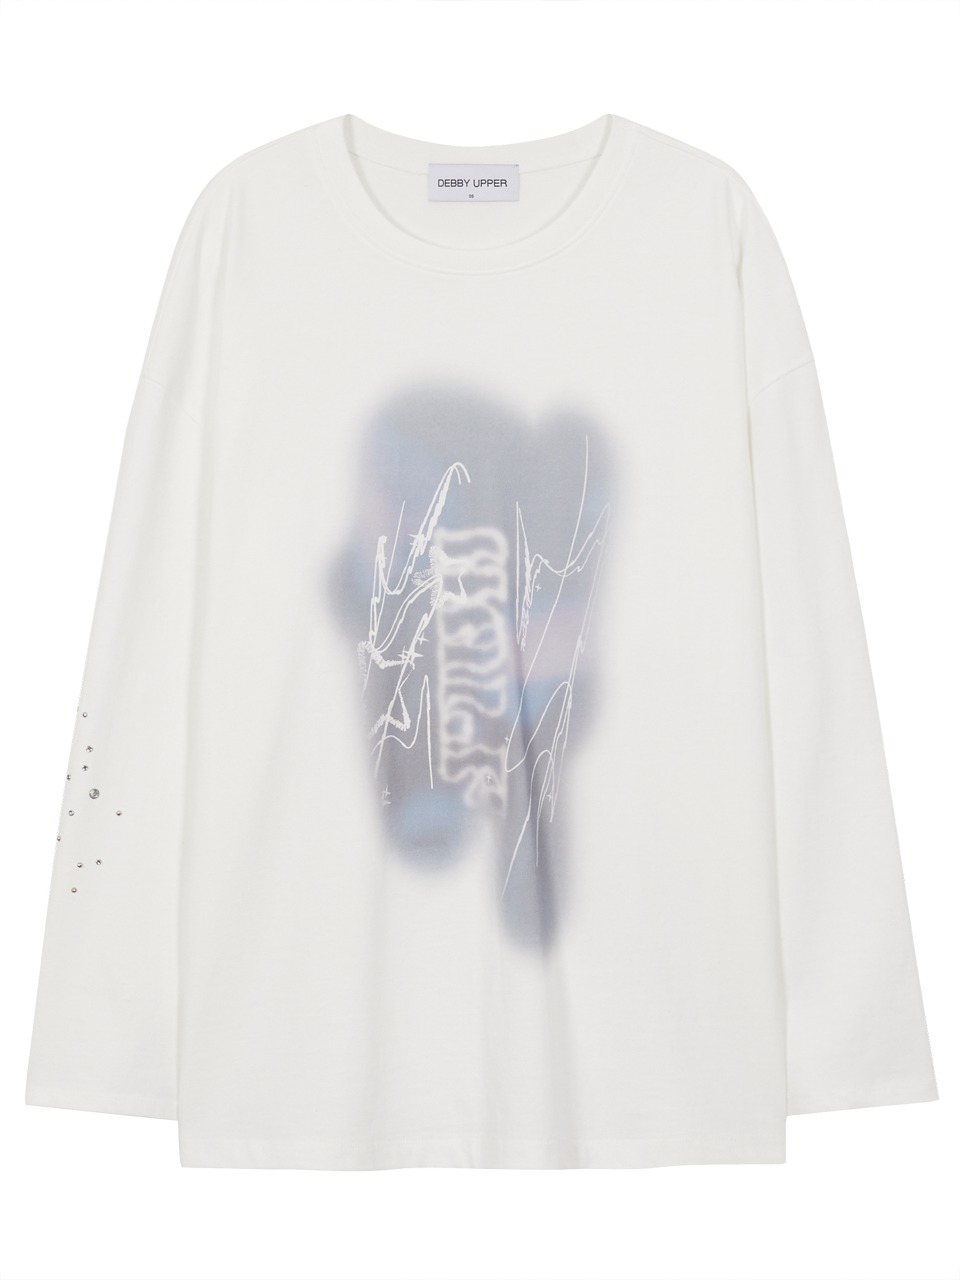 OVERFIT HALF PRINTED T-SHIRT_WHITE